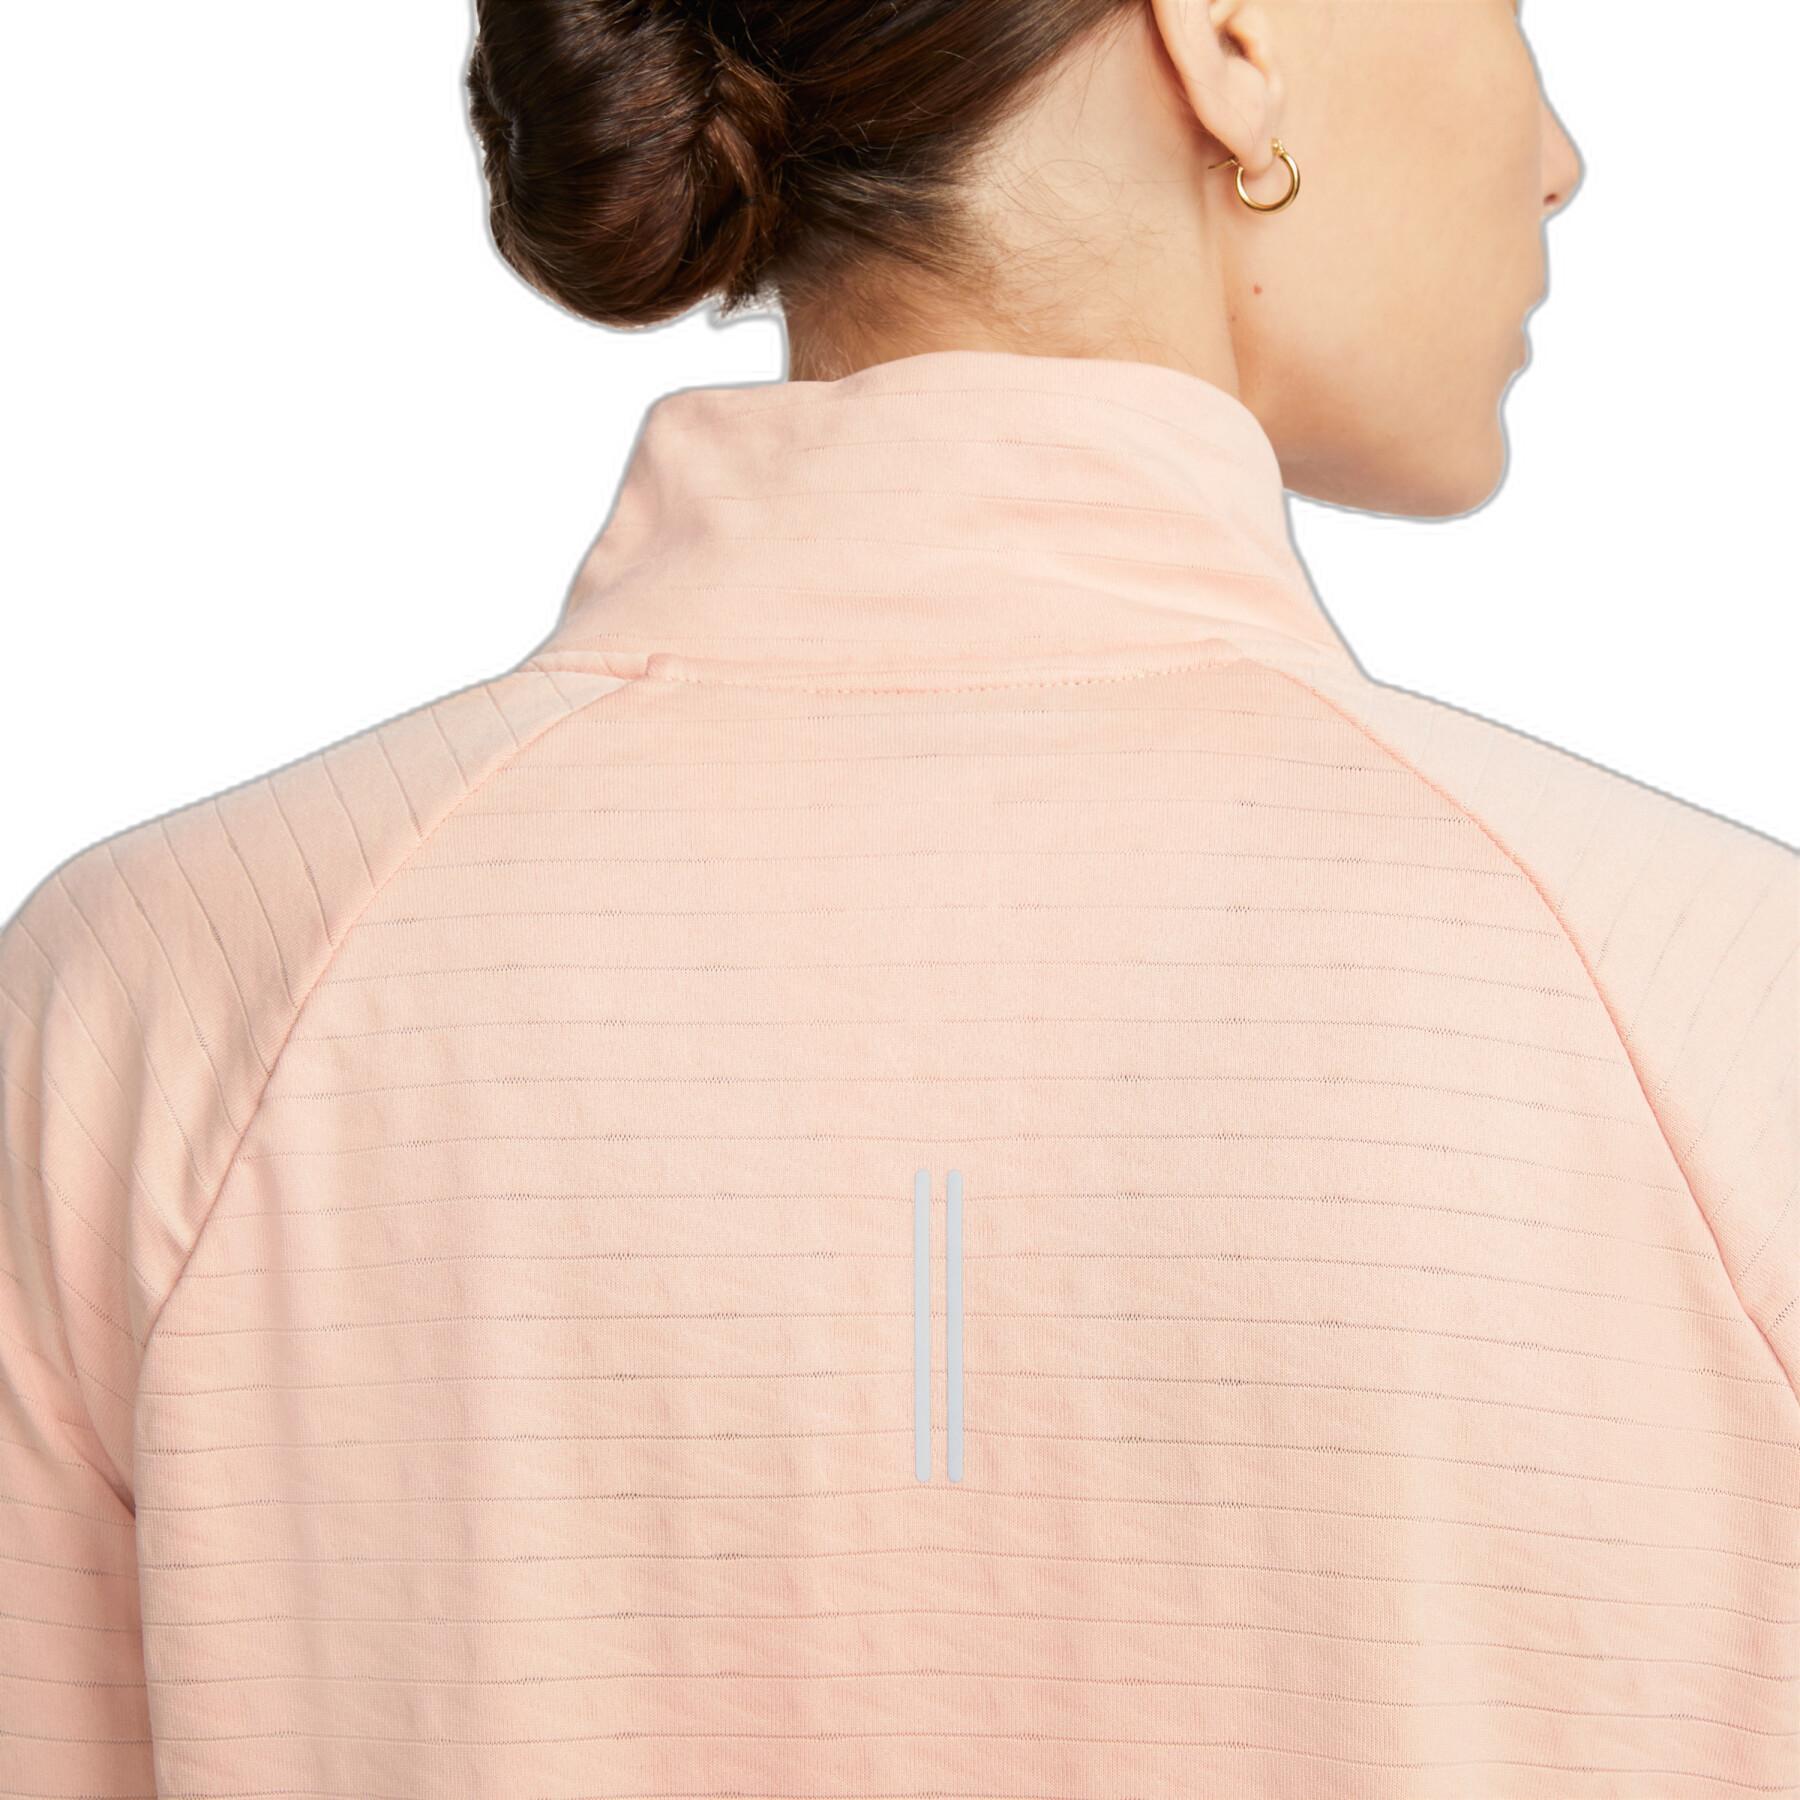 Women's long sleeve T-shirt Nike Therma-FIT Element Hz